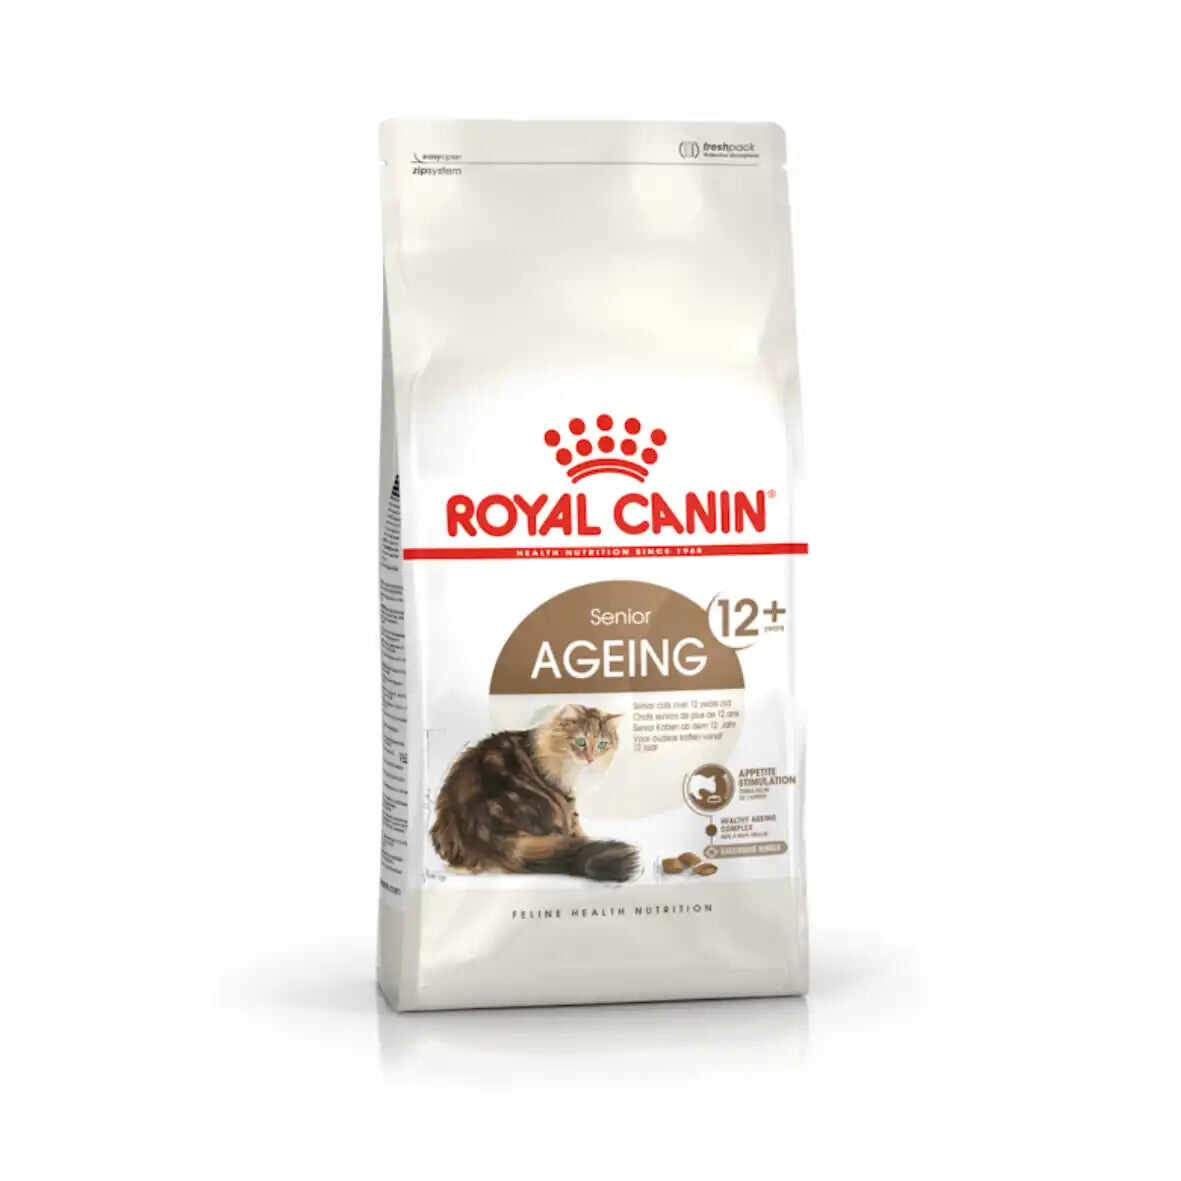 Royal Canin - Senior Ageing 12+ Years Cat Dry Food 2kg